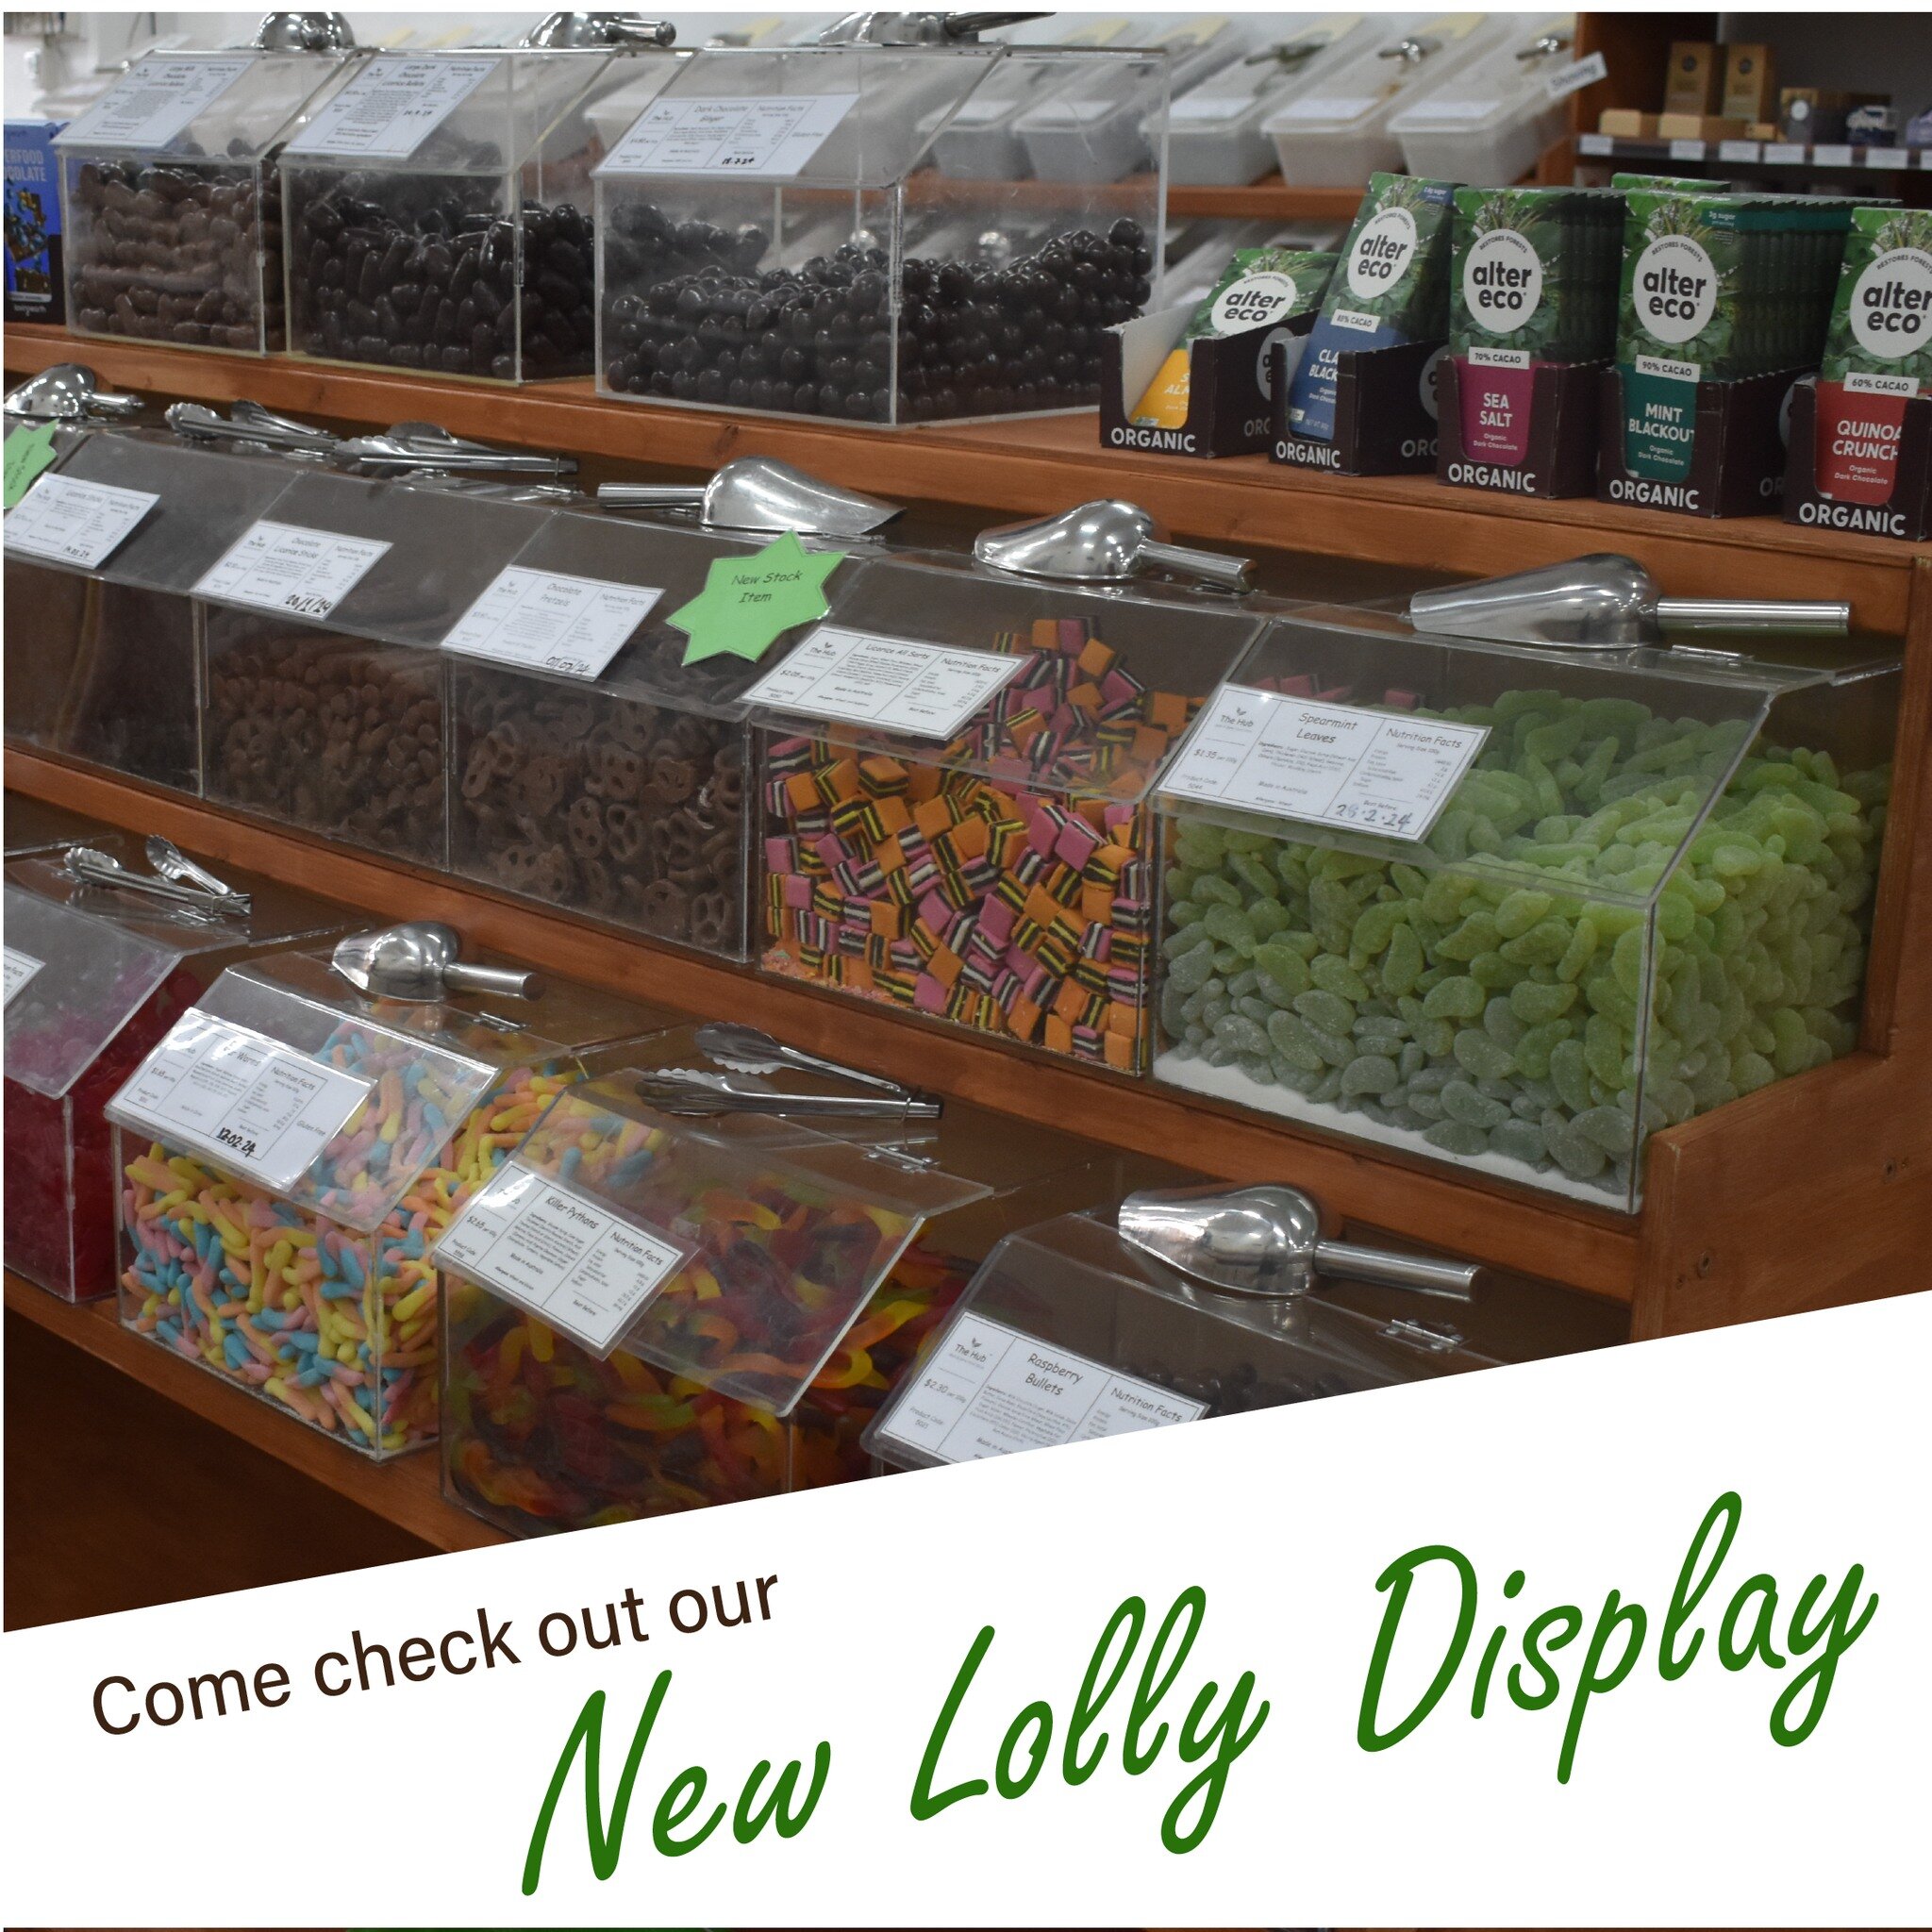 We've made a new lolly shelf to show off all our tasty goodies! Get your sweet treats at the Hub Bulk and Bare. #lollies #sweettreats